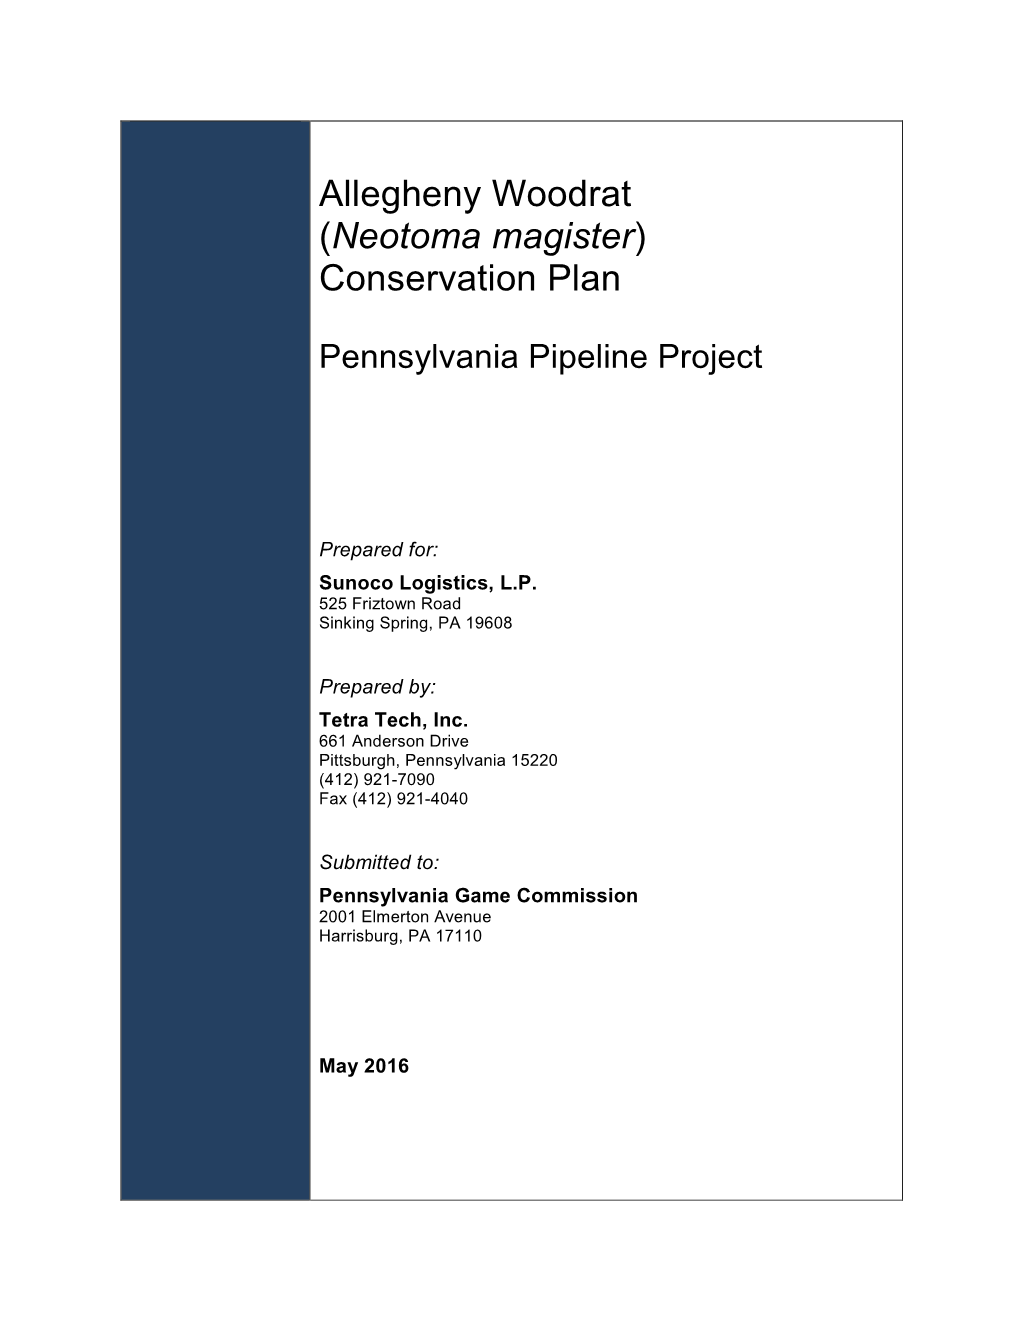 Allegheny Woodrat (Neotoma Magister) Conservation Plan